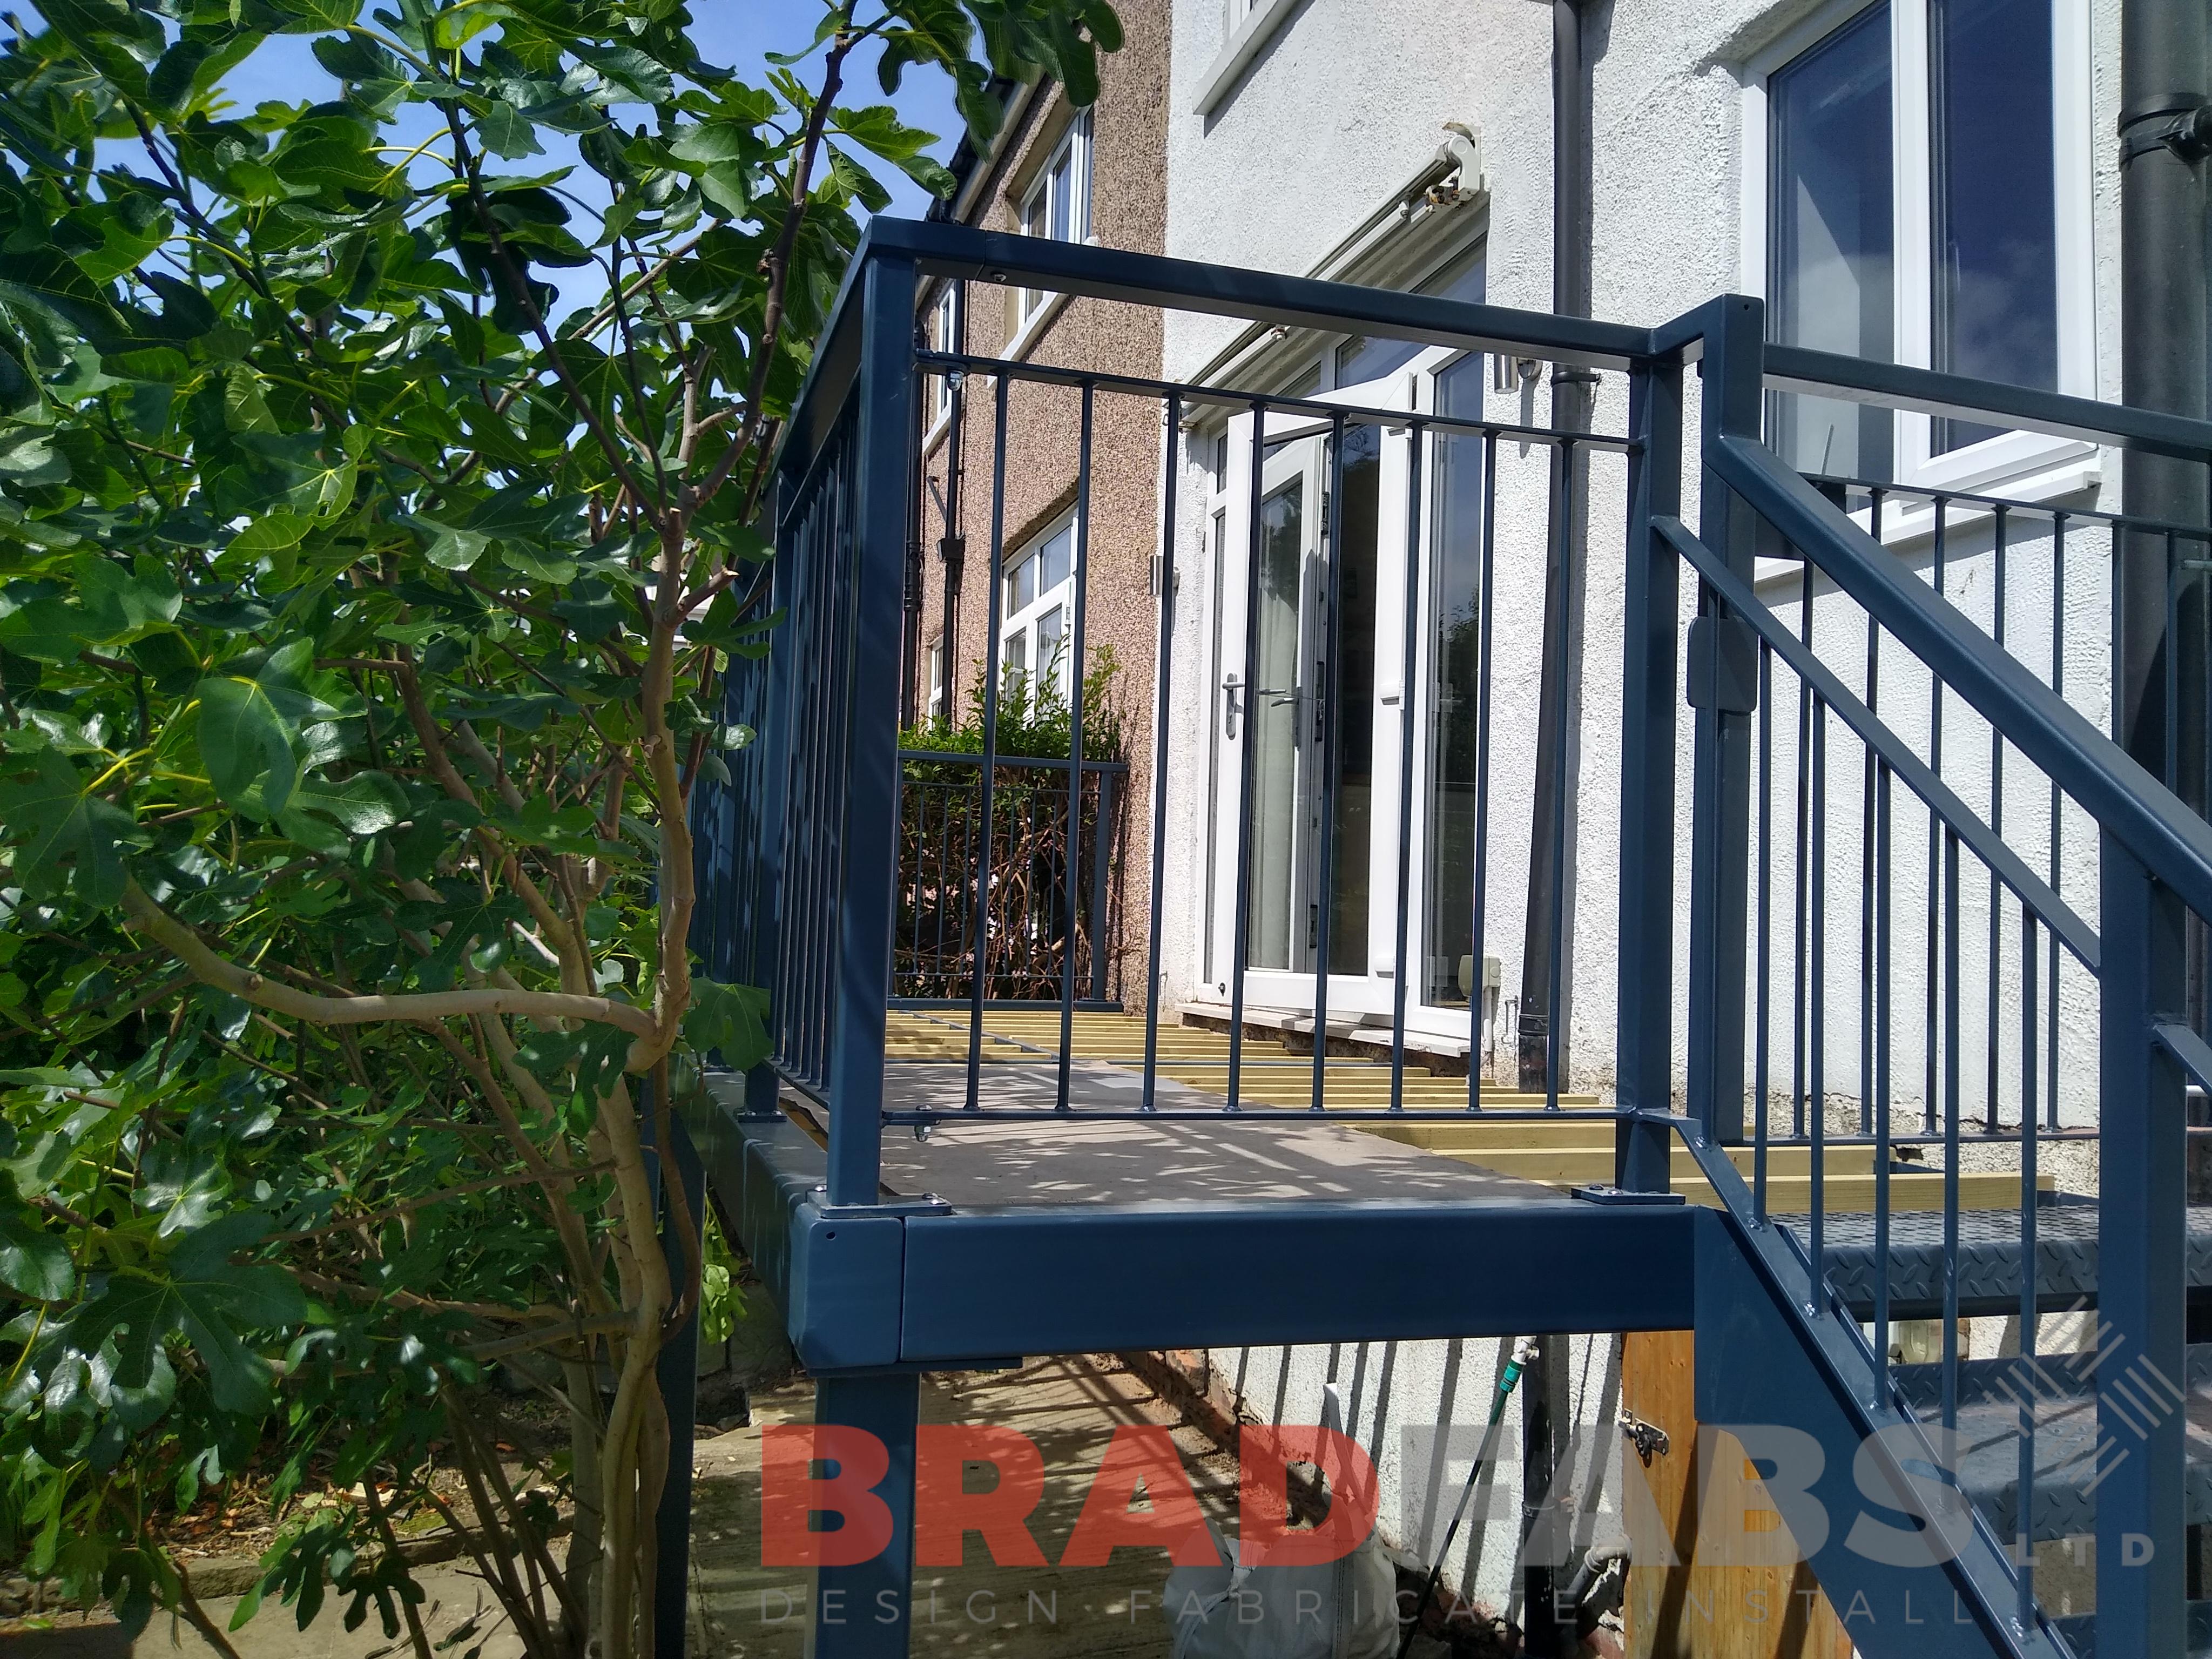 Bradfabs balcony with legs, stainless steel balustrade